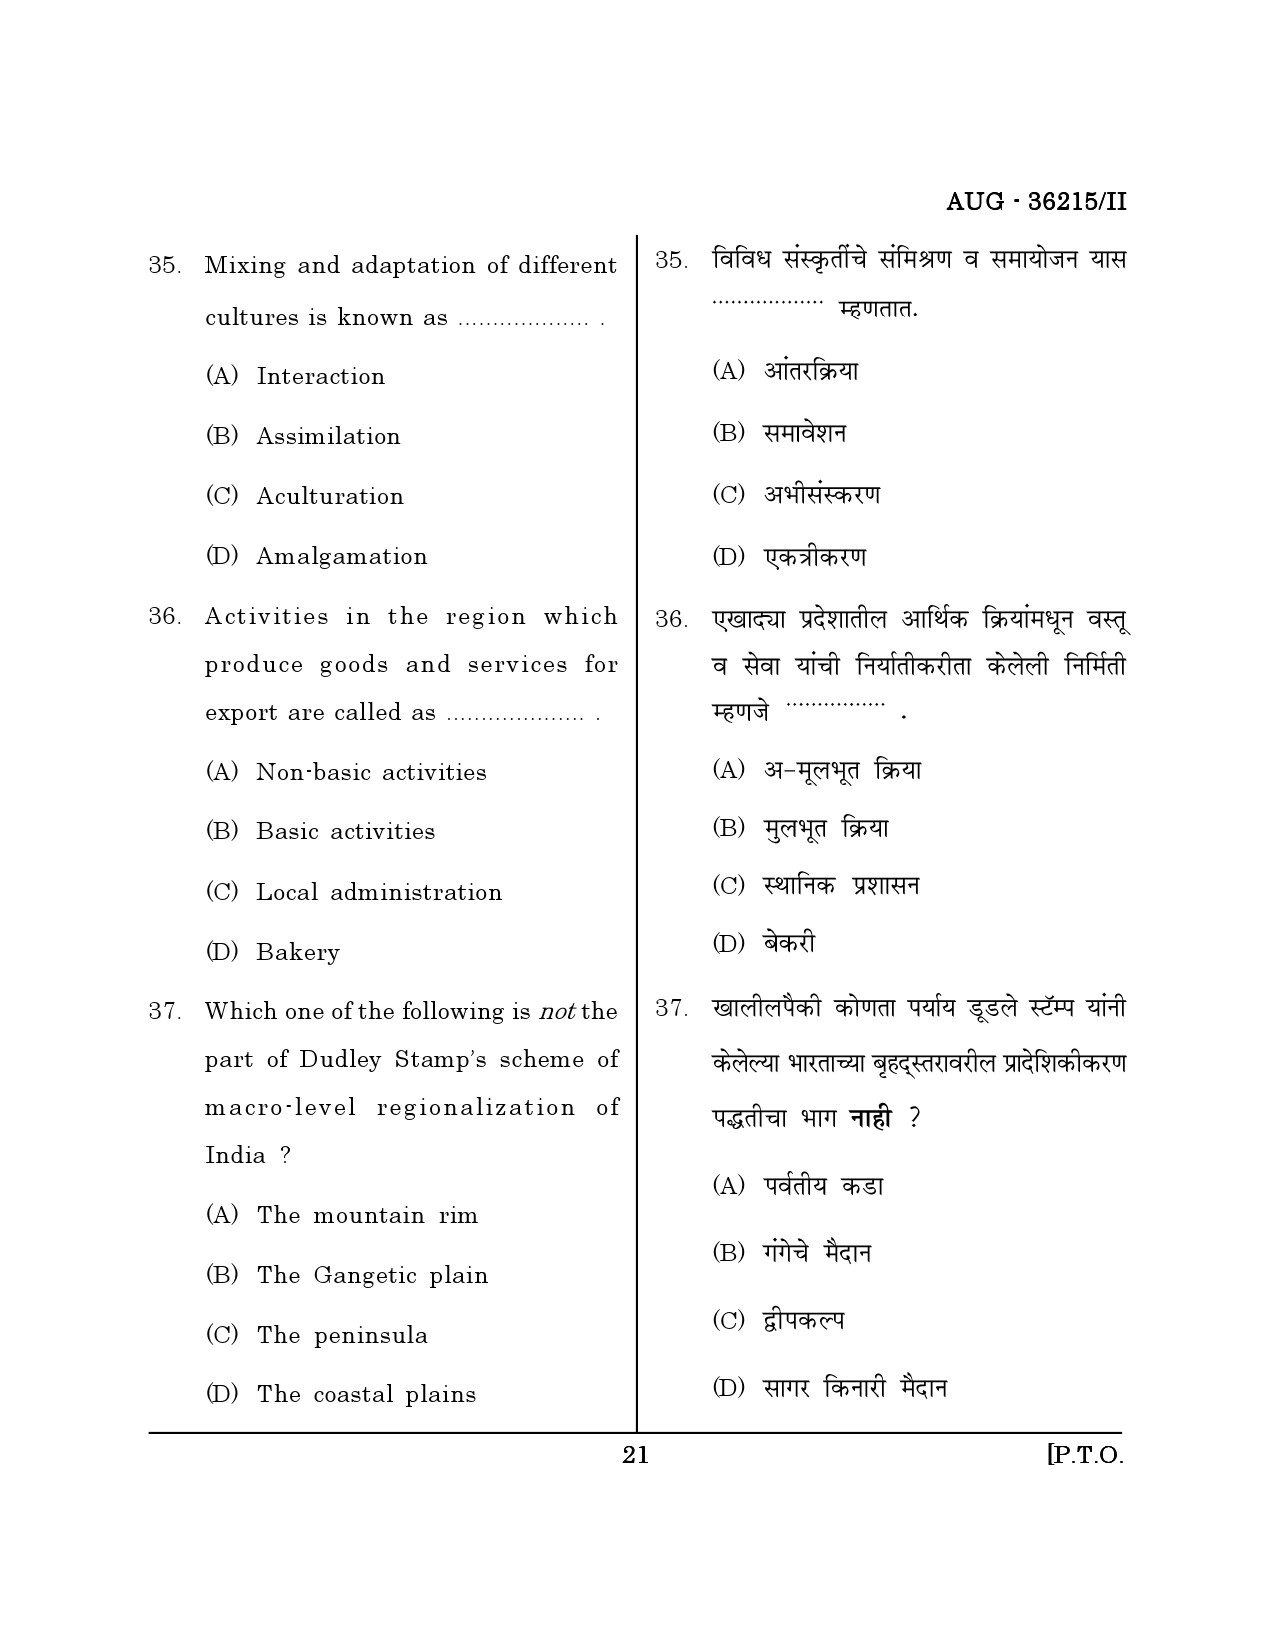 Maharashtra SET Geography Question Paper II August 2015 20